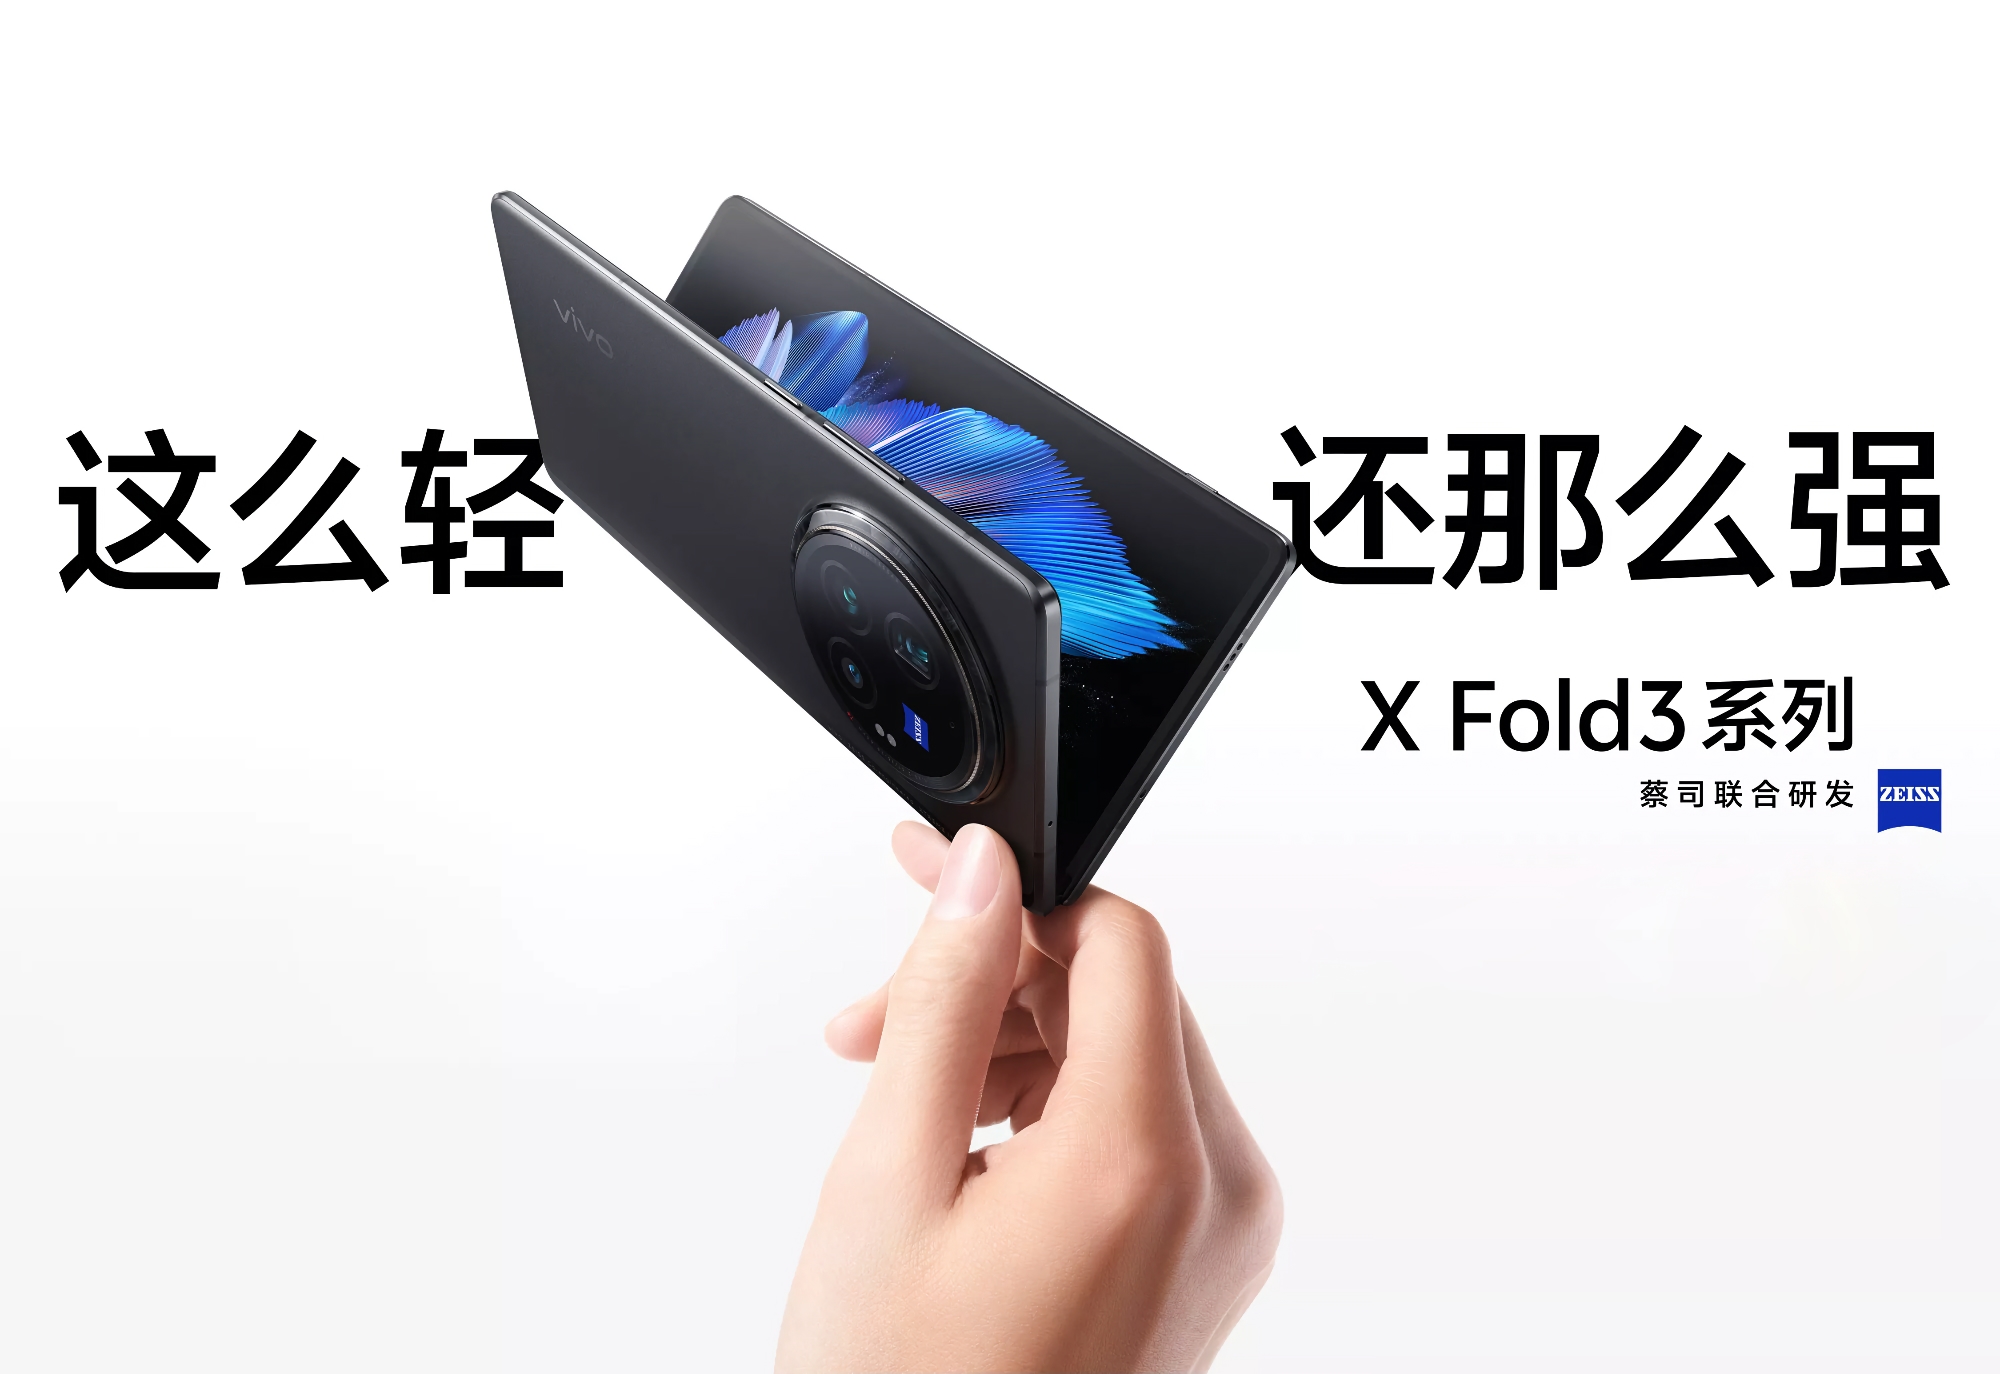 vivo X Fold 3 Pro: foldable smartphone with Snapdragon 8 Gen 3 chip and 5700 mAh battery priced from $1385